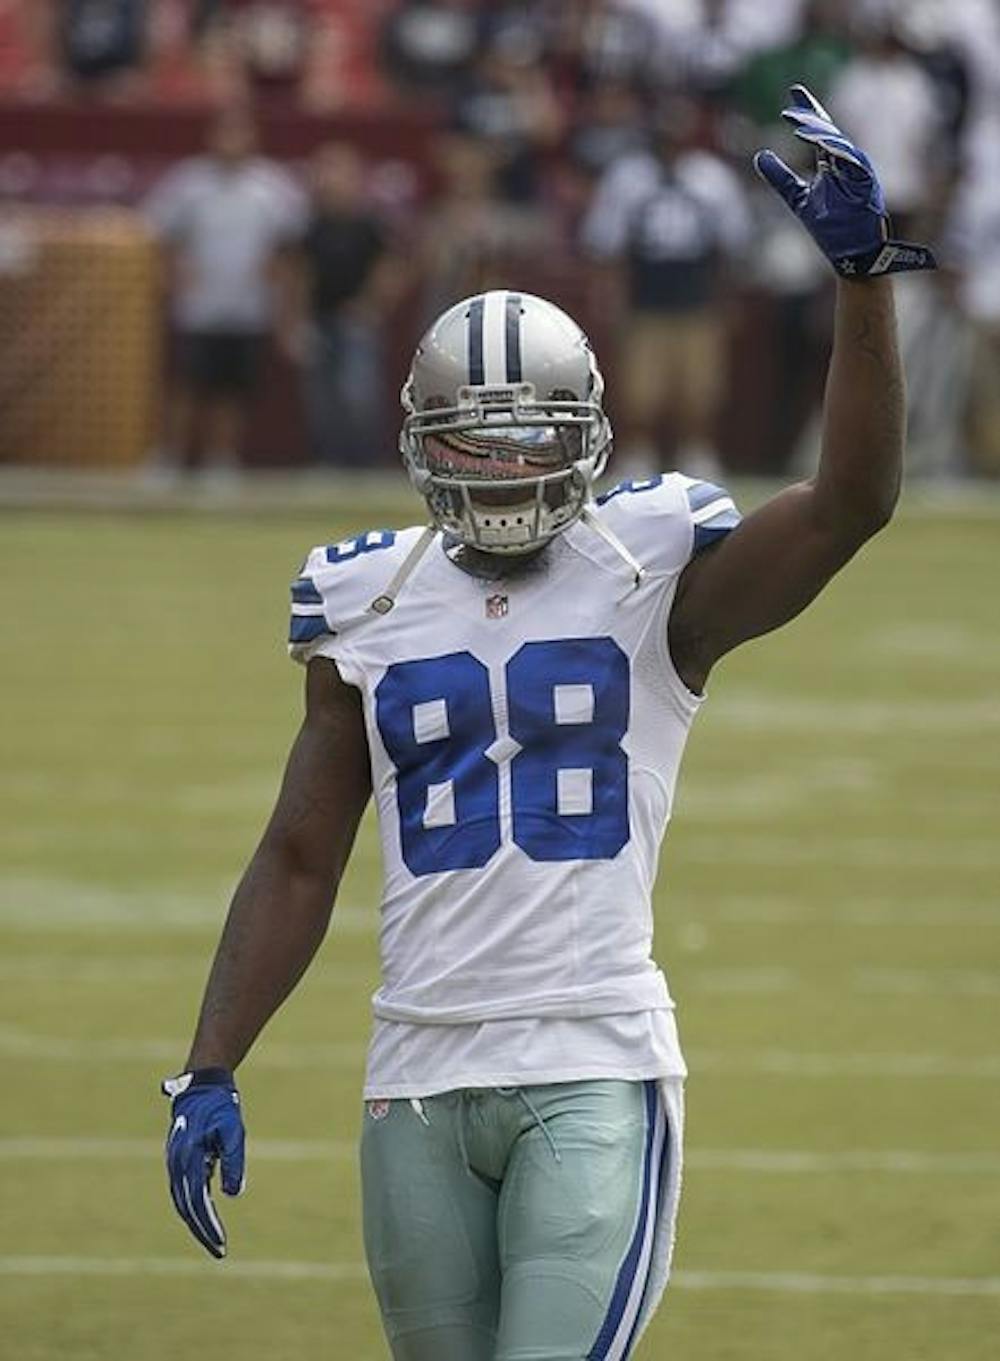 KEITH ALLISON/CC BY-SA 2.0
Dez Bryant signed with the Saints but did not get to play a game with them.